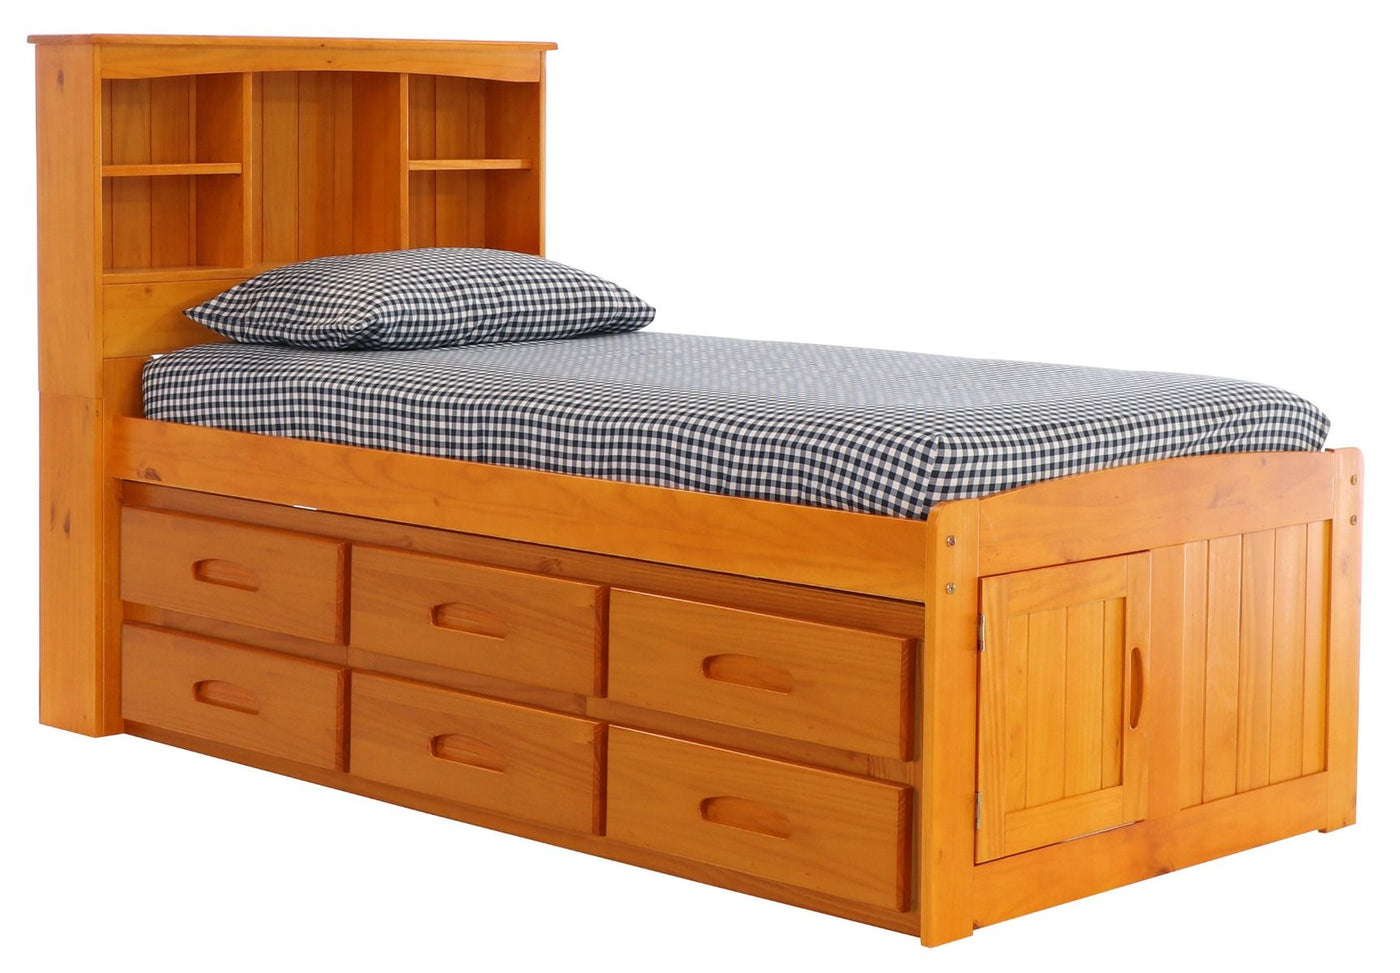 DISCOVERY WORLD FURNITURE HONEY TWIN SIZE CAPTAINS BED Custom Kids Furniture